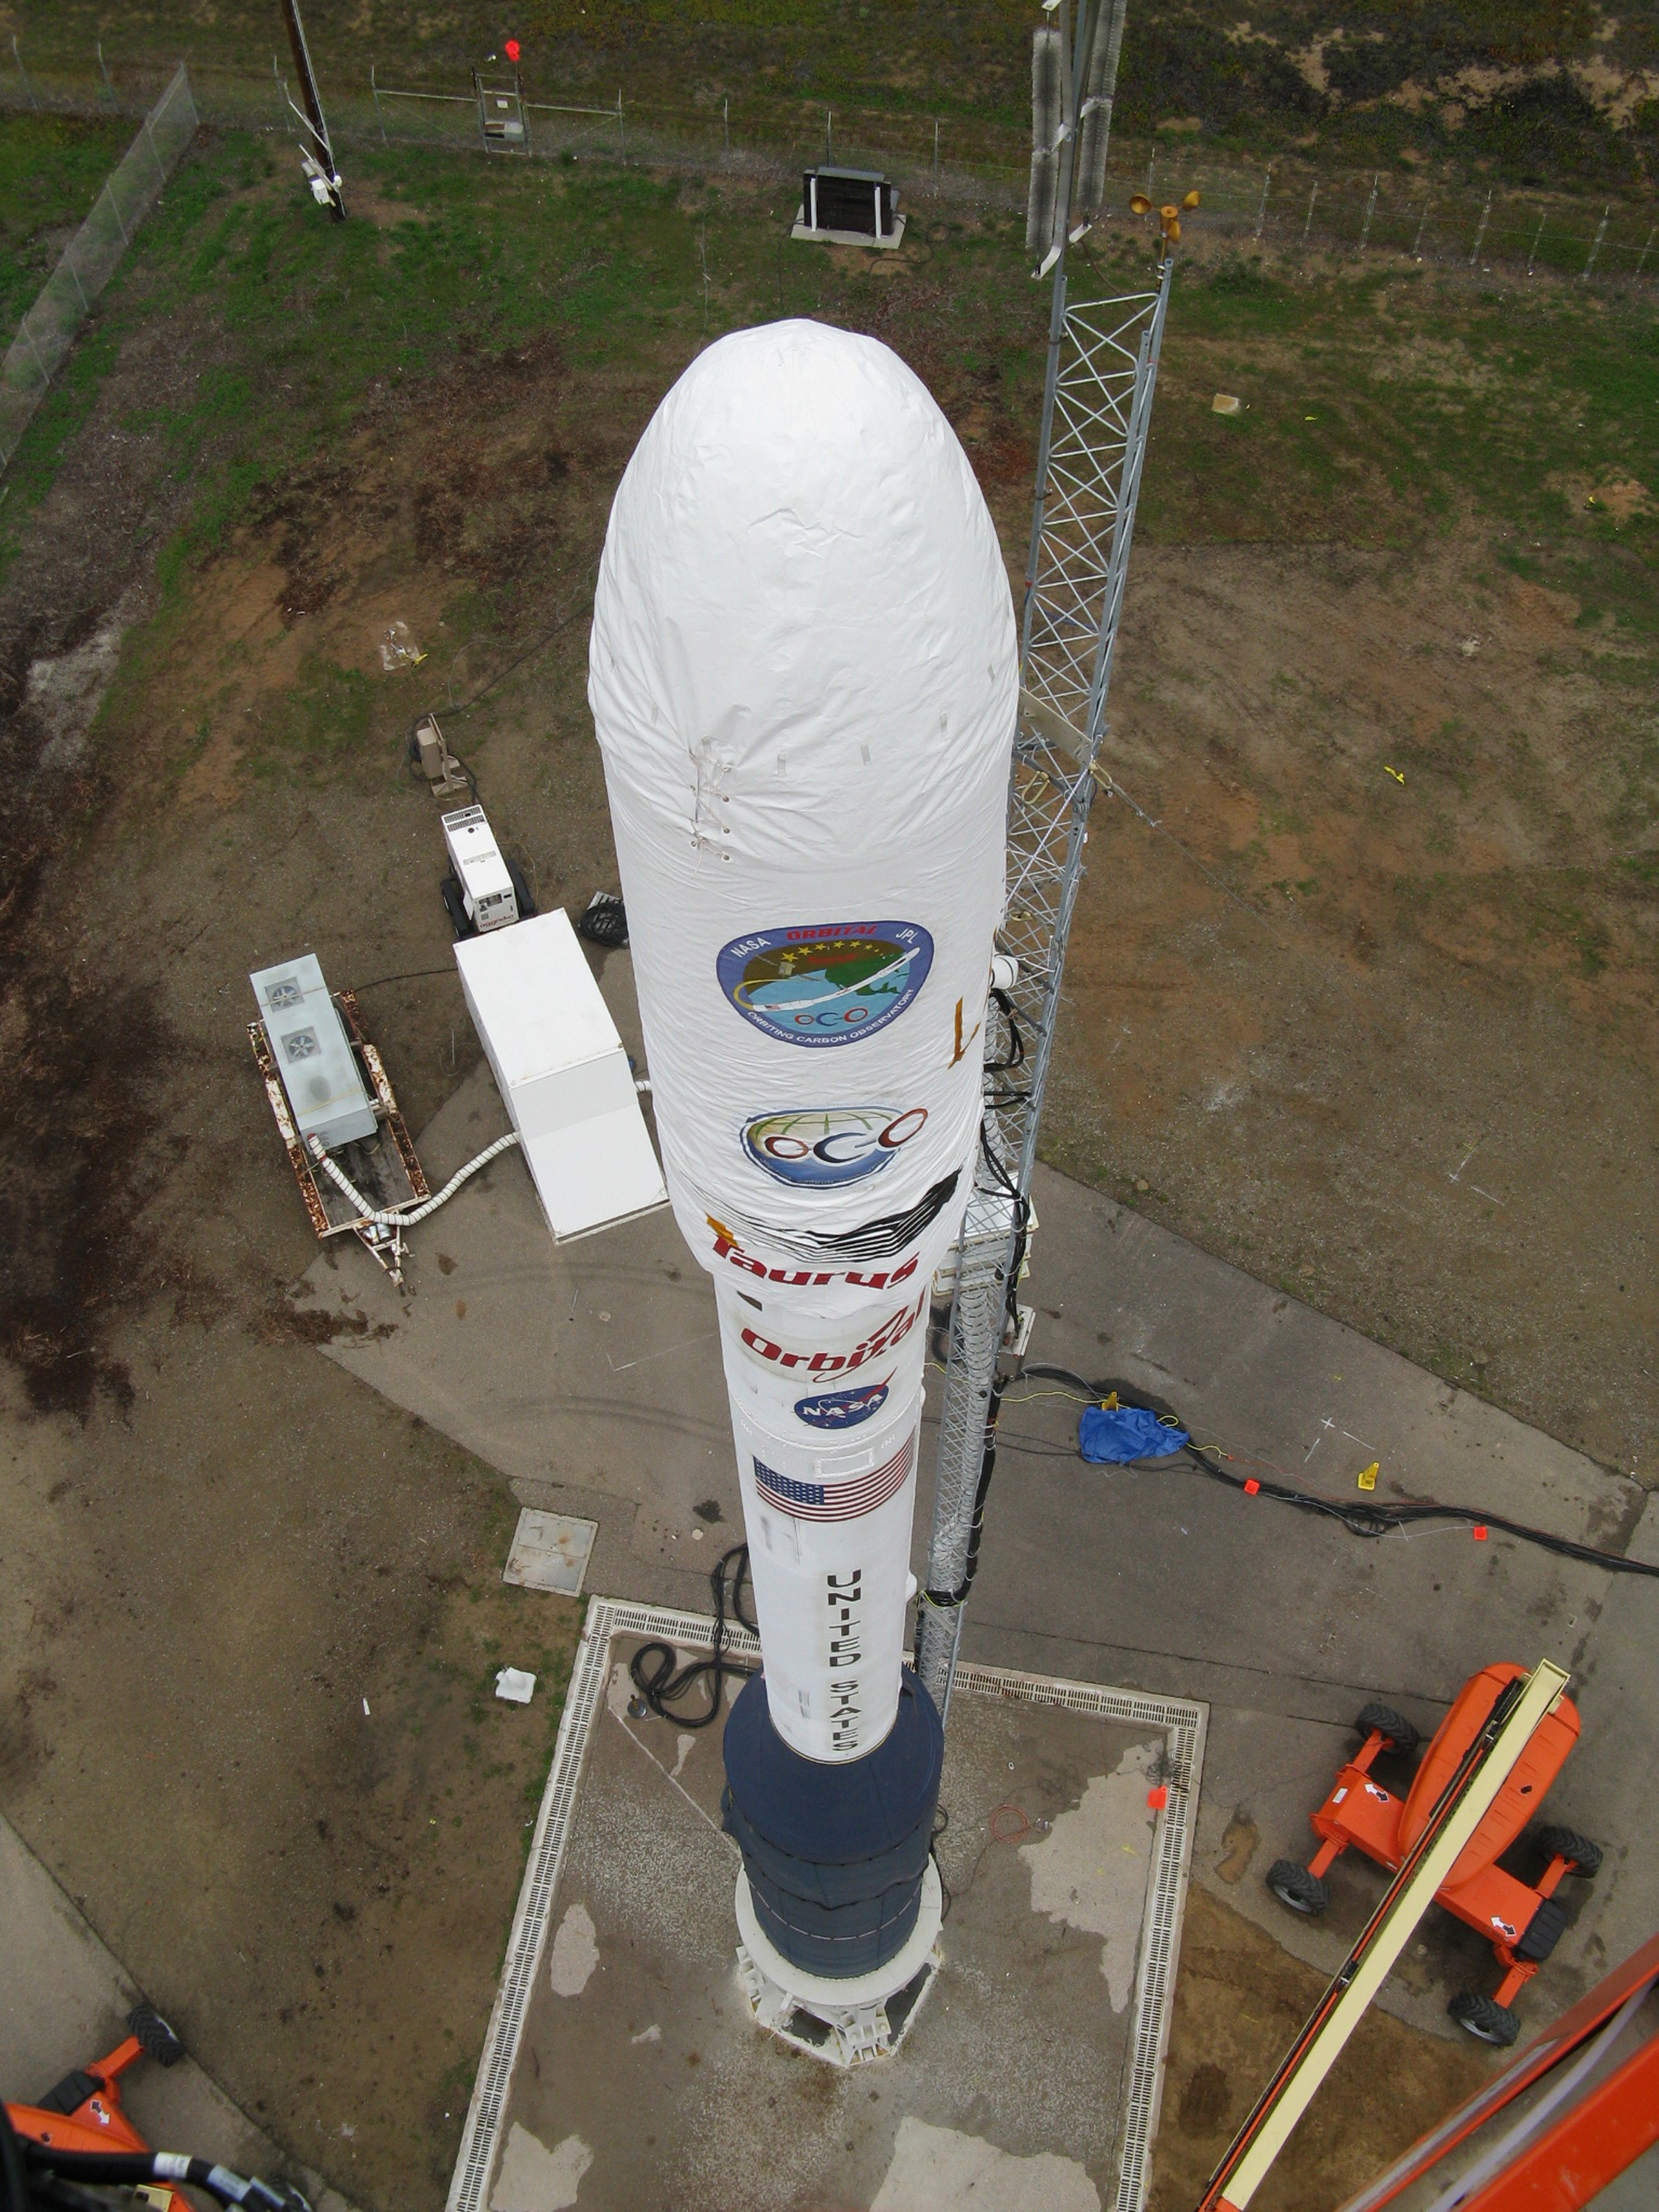 Top down view of Taurus XL carrying OCO